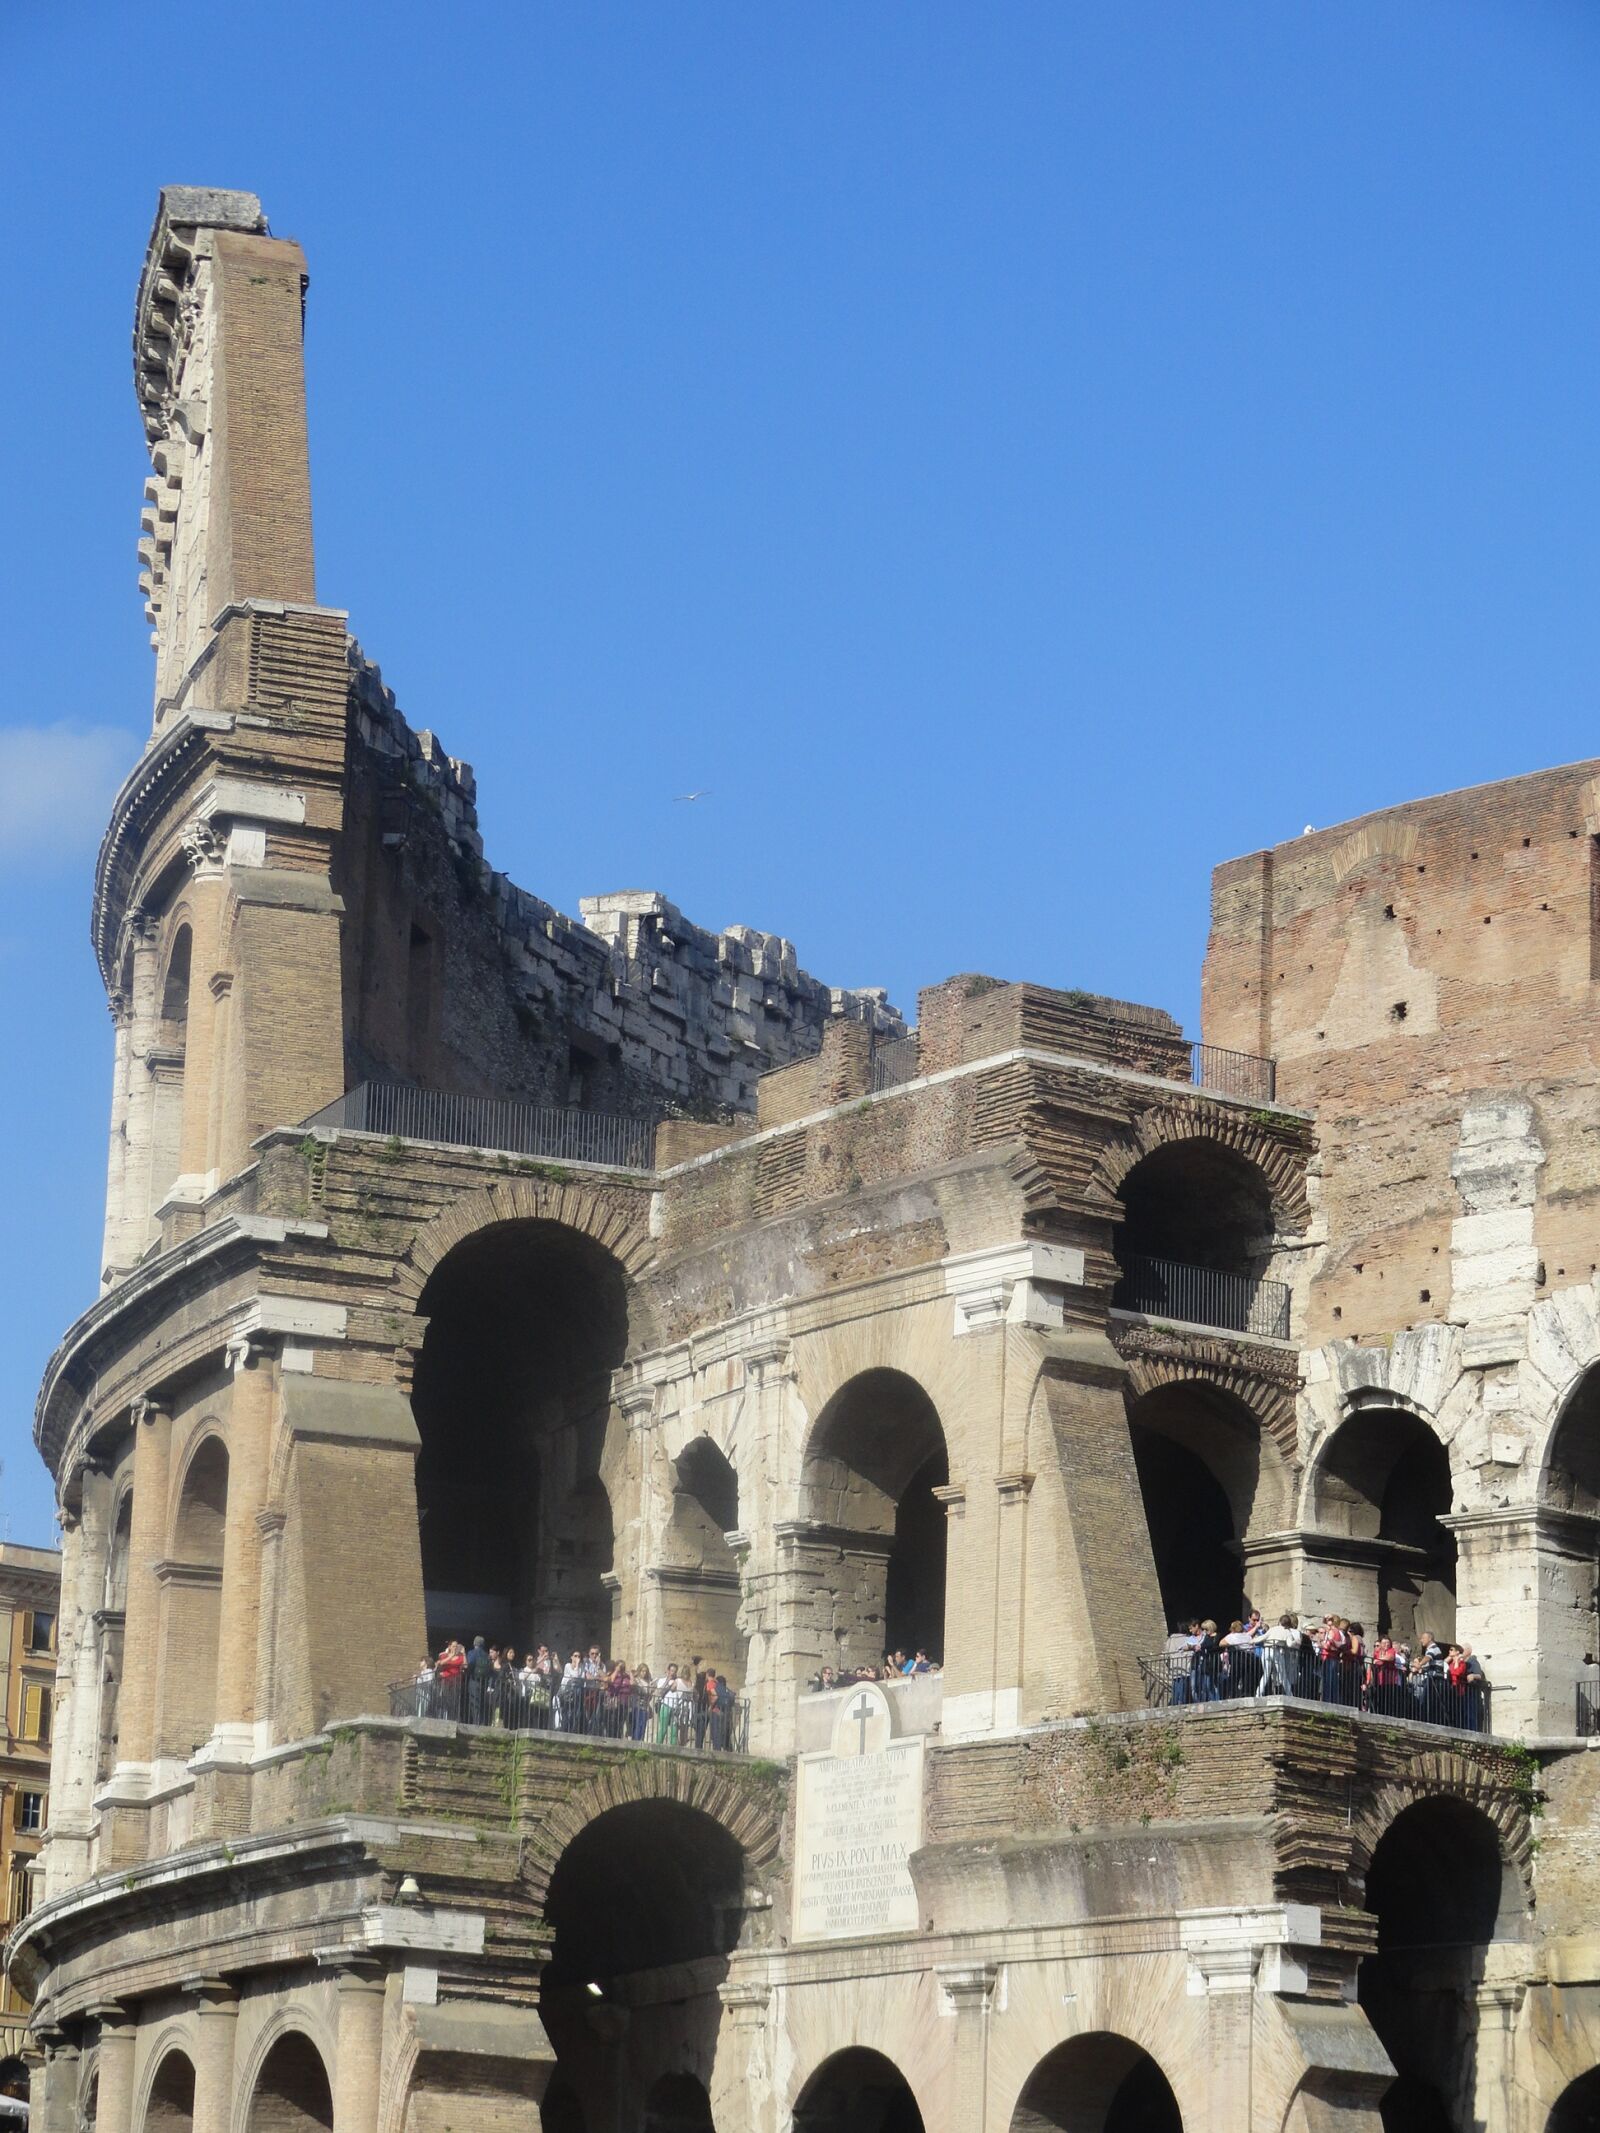 Sony Cyber-shot DSC-H70 sample photo. The coliseum, the ruins photography